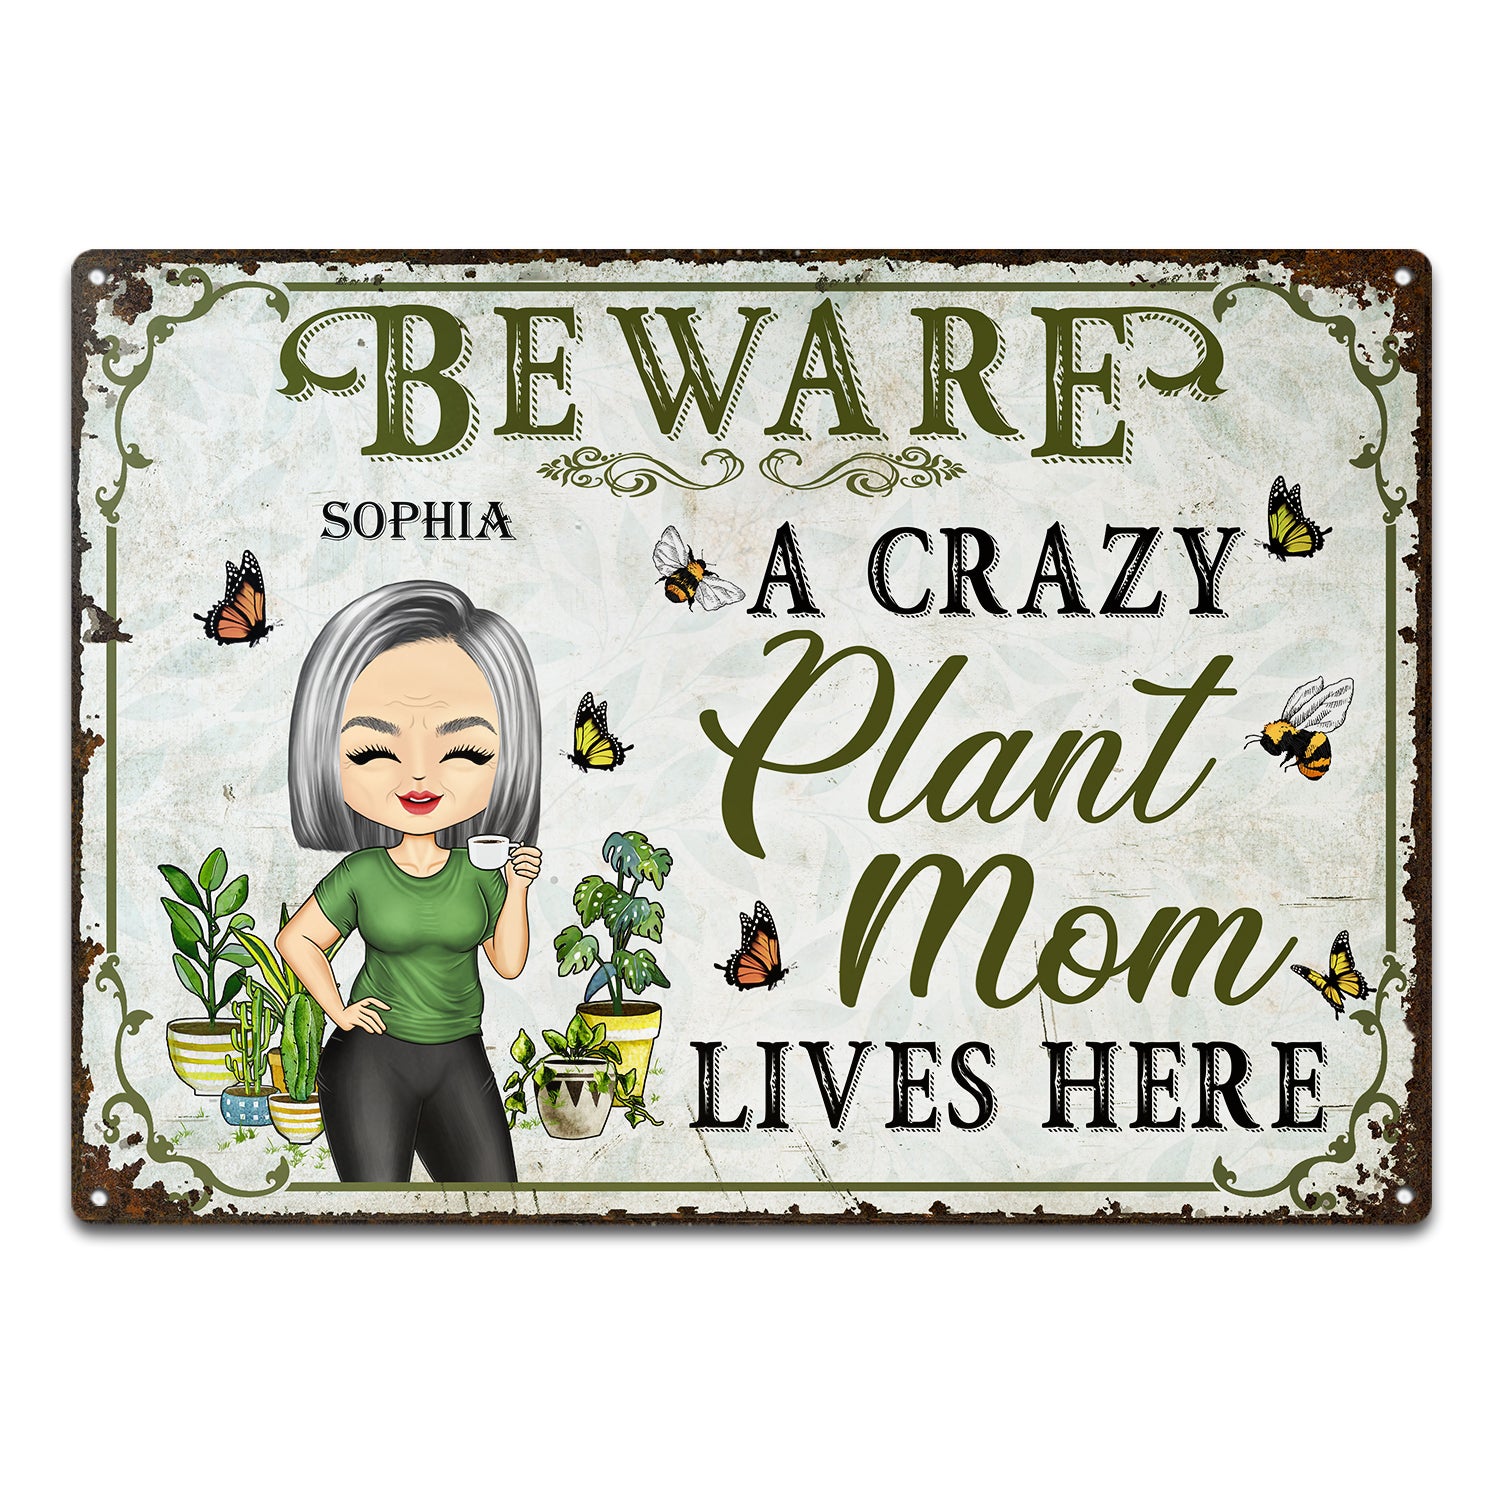 Beware A Crazy Plant Mom Lives Here - Birthday, Loving Gift For Mother, Grandma, Grandmother - Personalized Custom Metal Signs